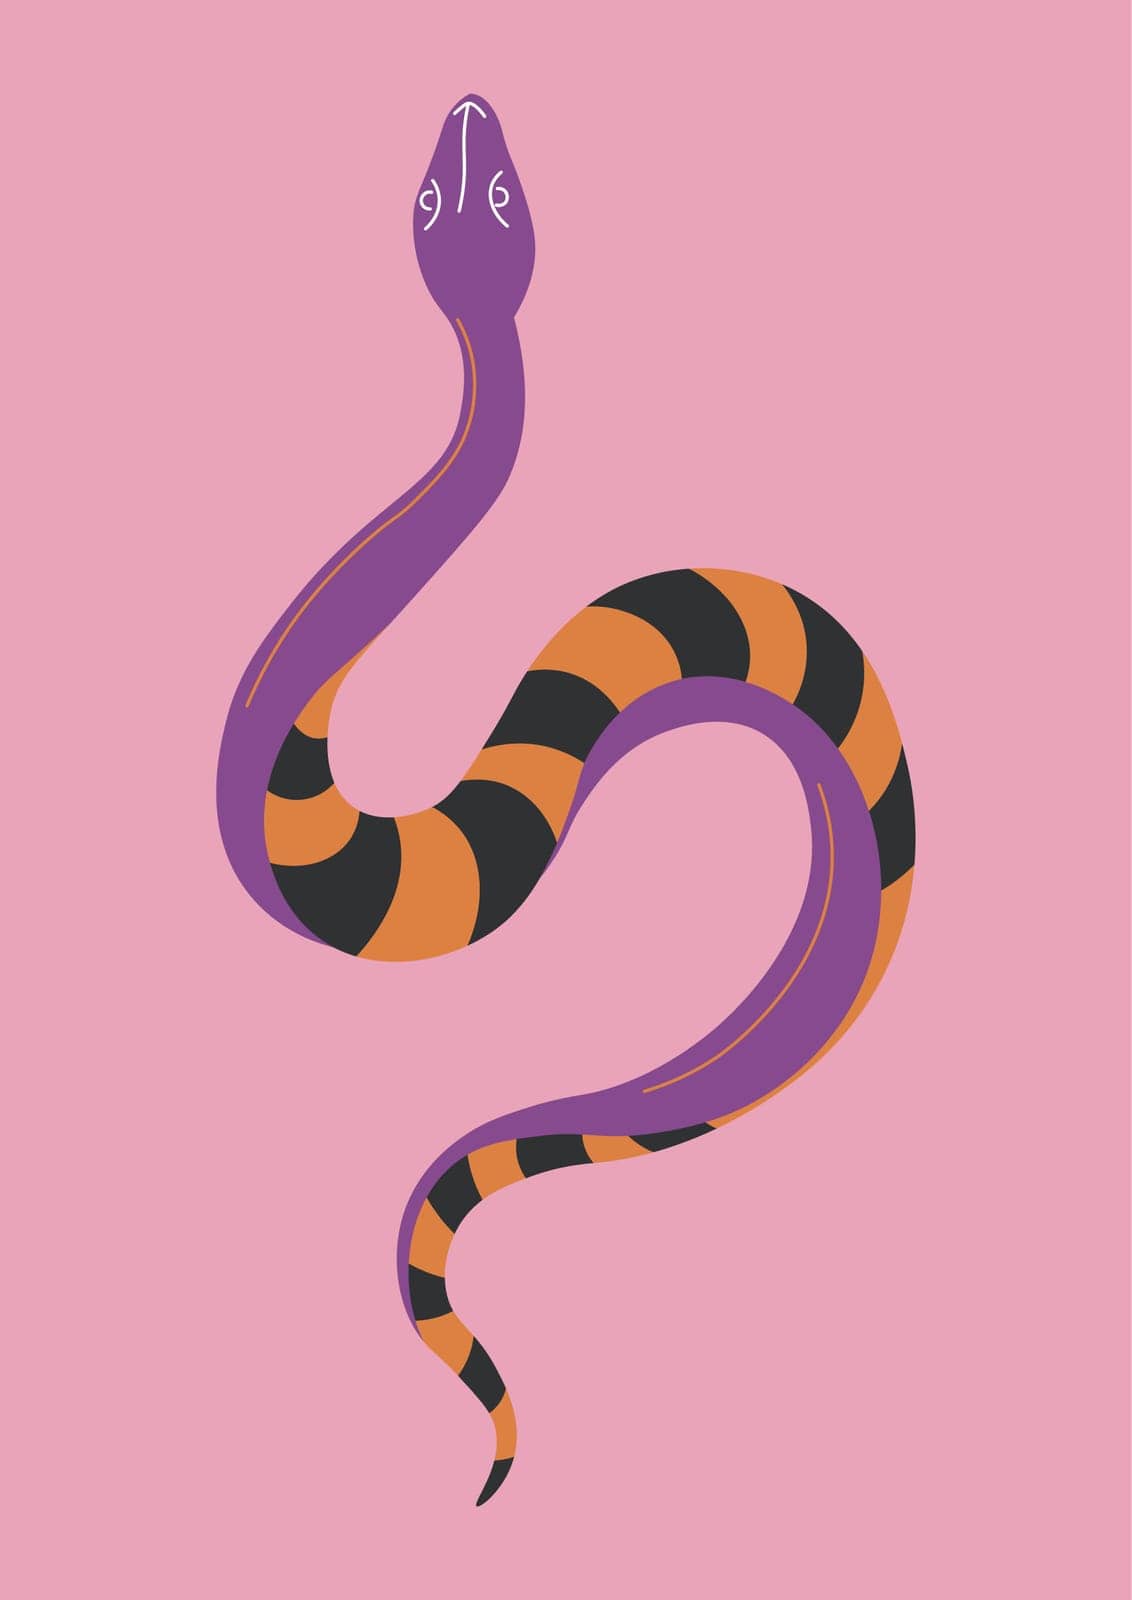 Serpent with stripes, snake magic reptile creature by Sonulkaster